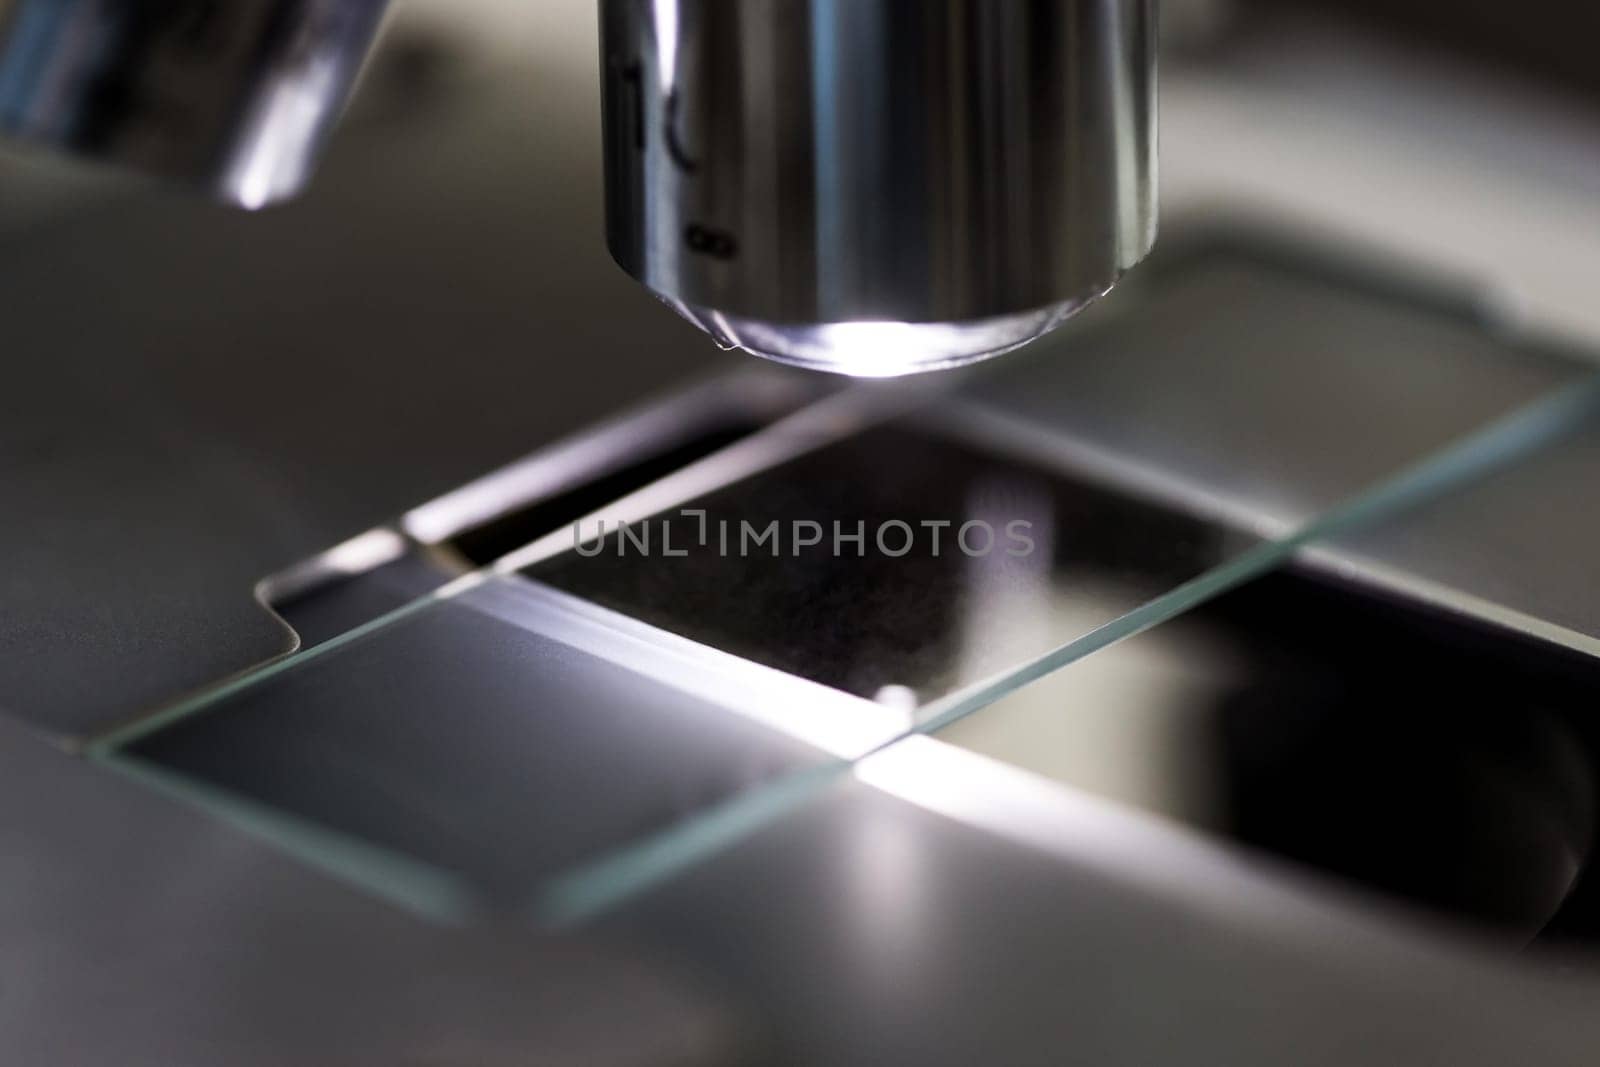 Laboratory Microscope. Scientific and healthcare research background. Analyzes